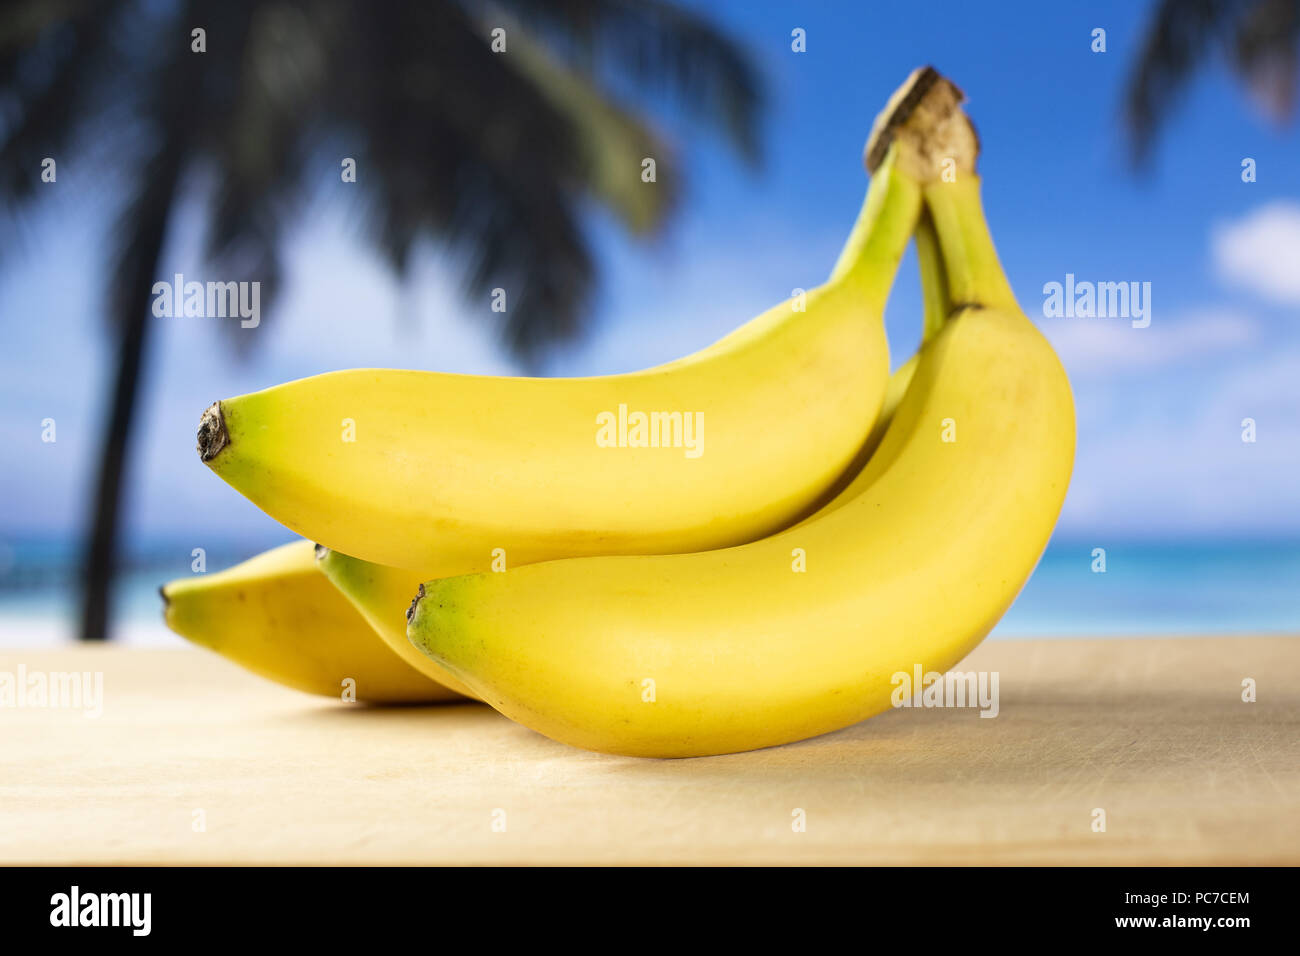 Group of three whole fresh yellow banana one cluster with palm trees on the beach in background Stock Photo